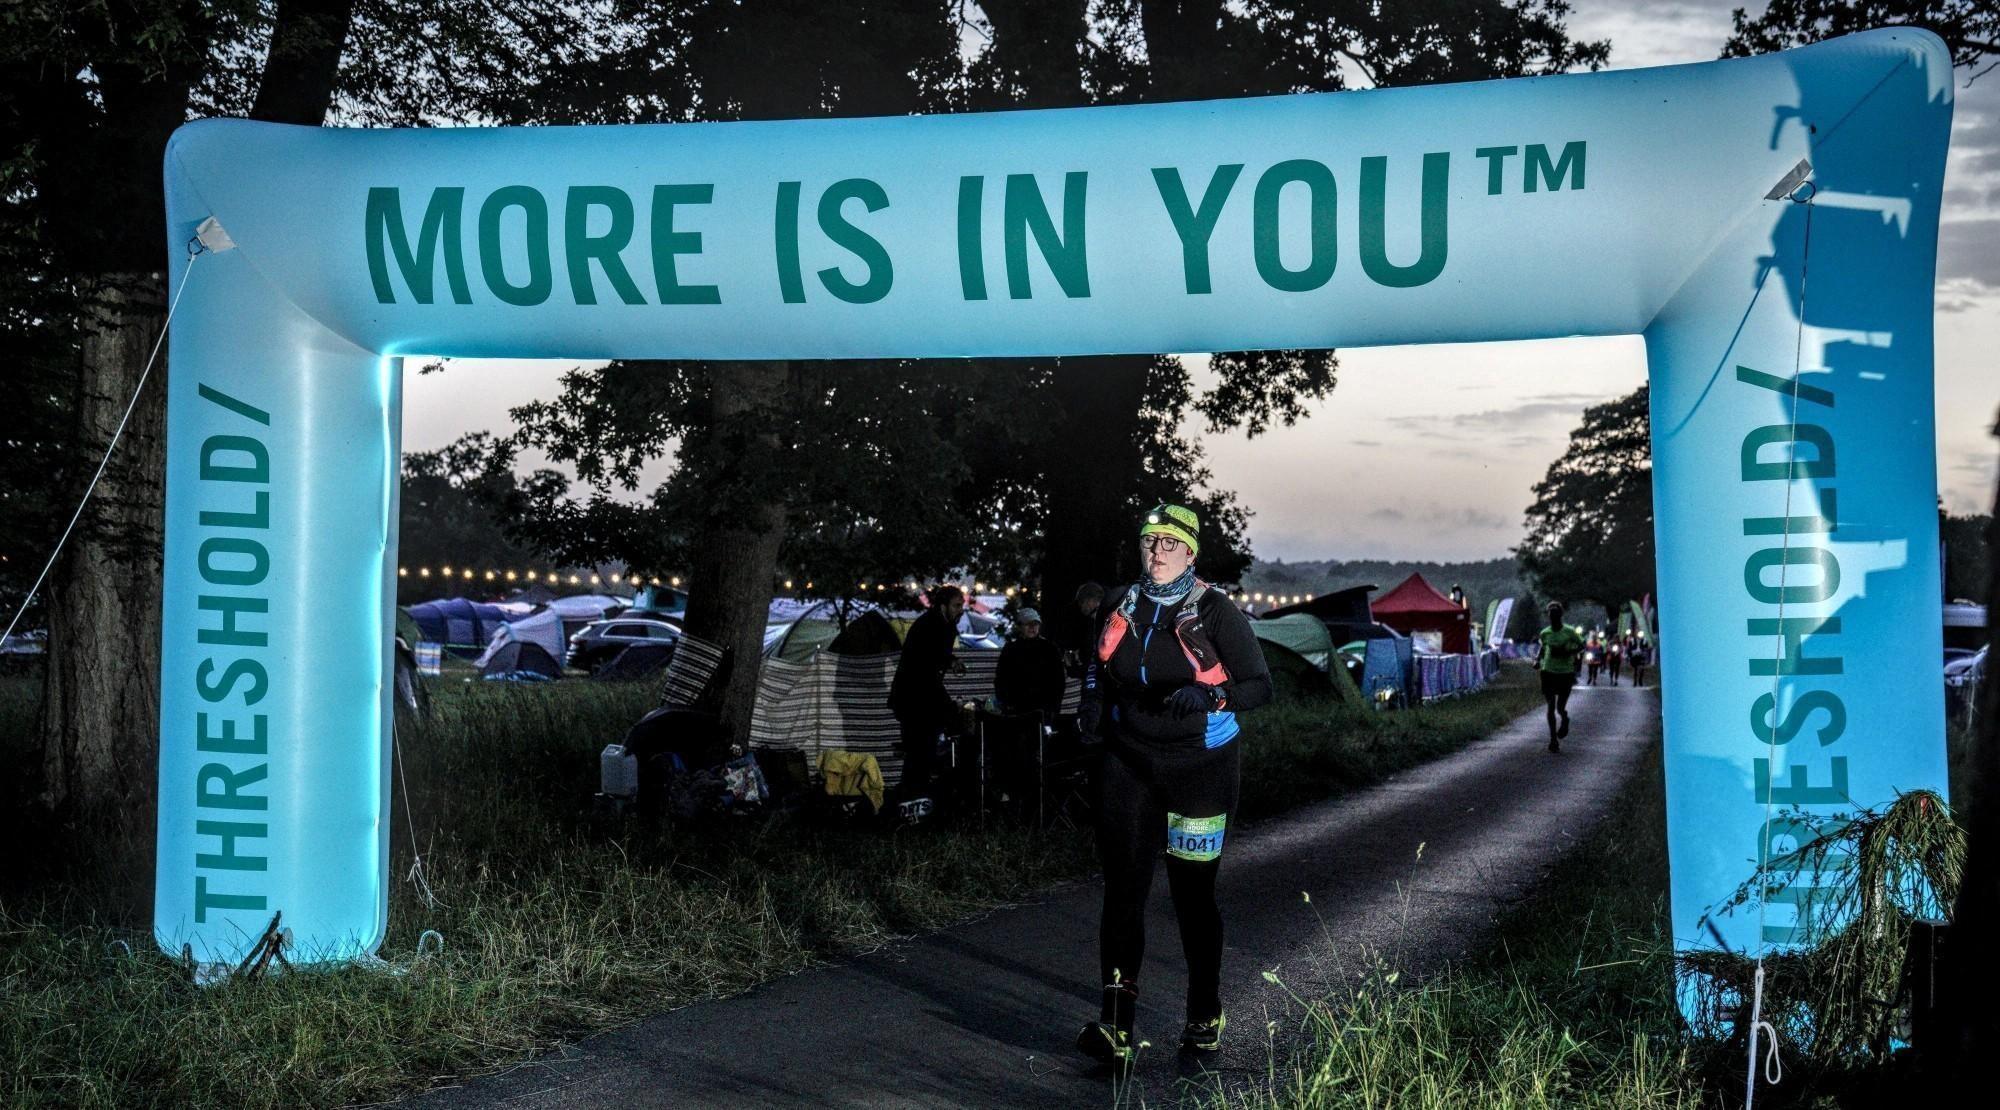 My first long distance race - Endure24 Reading